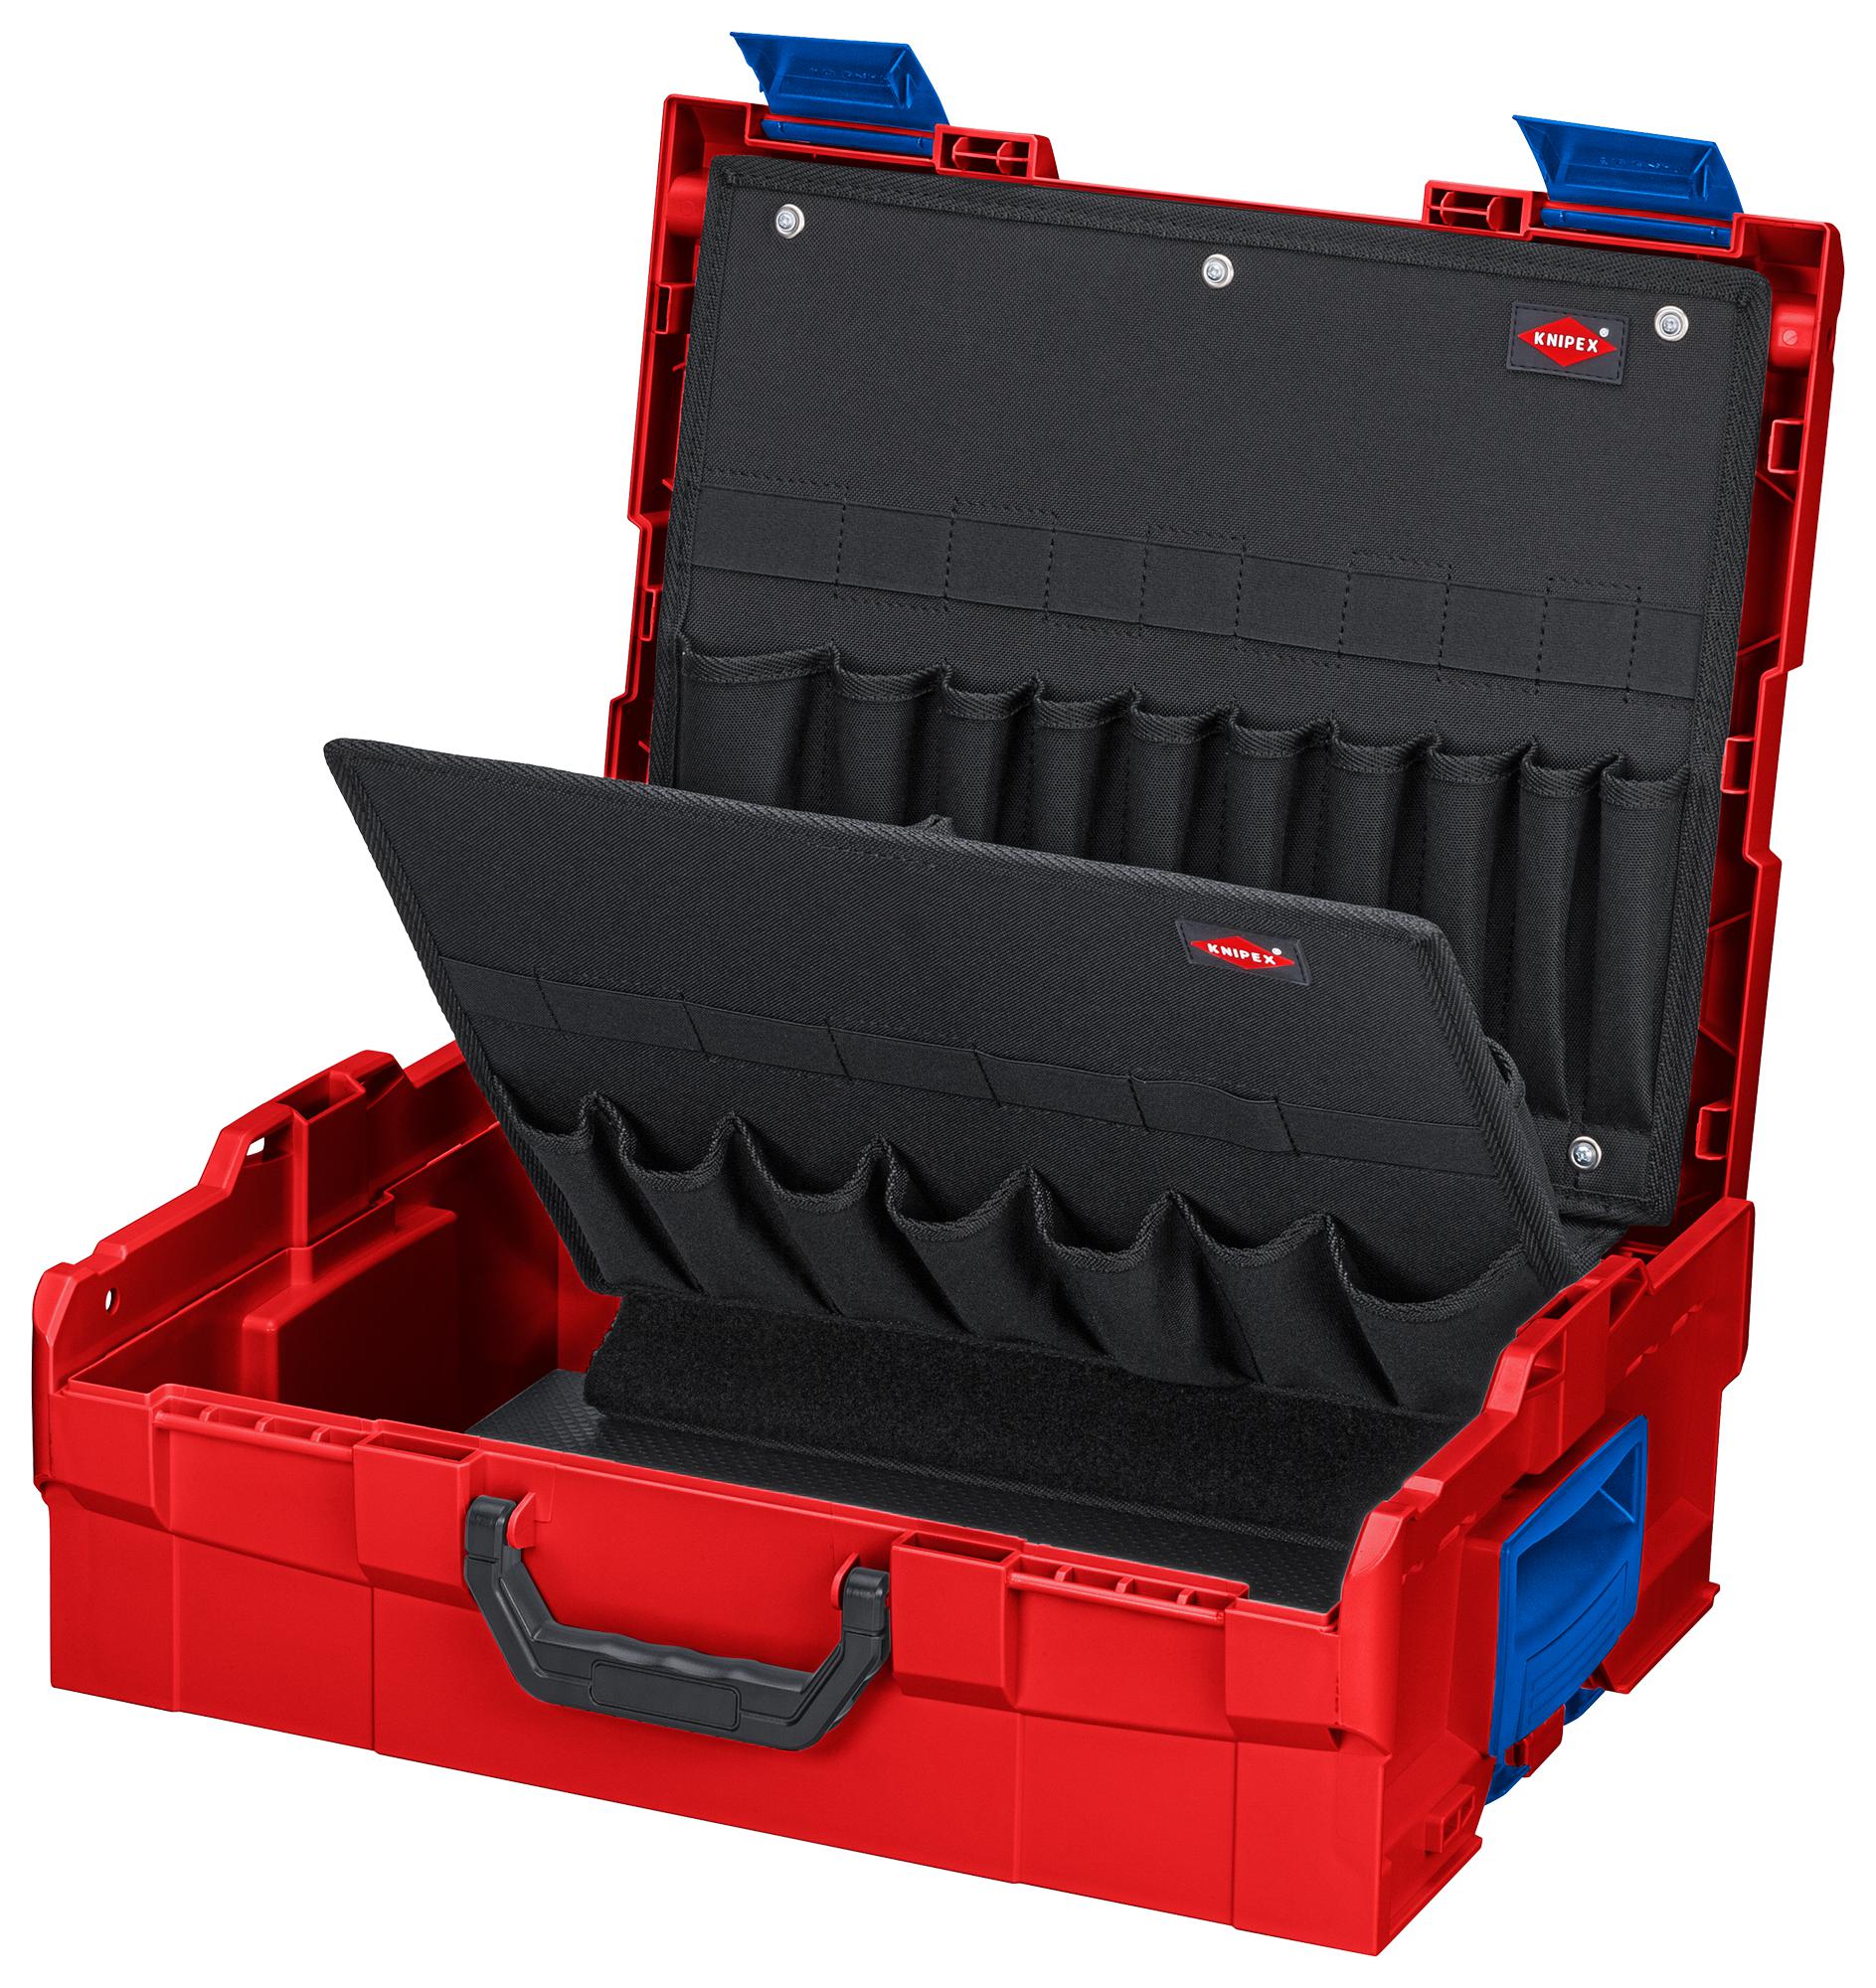 00 21 19 LB TOOL CASE, 357 X 442 X 151MM, ABS KNIPEX